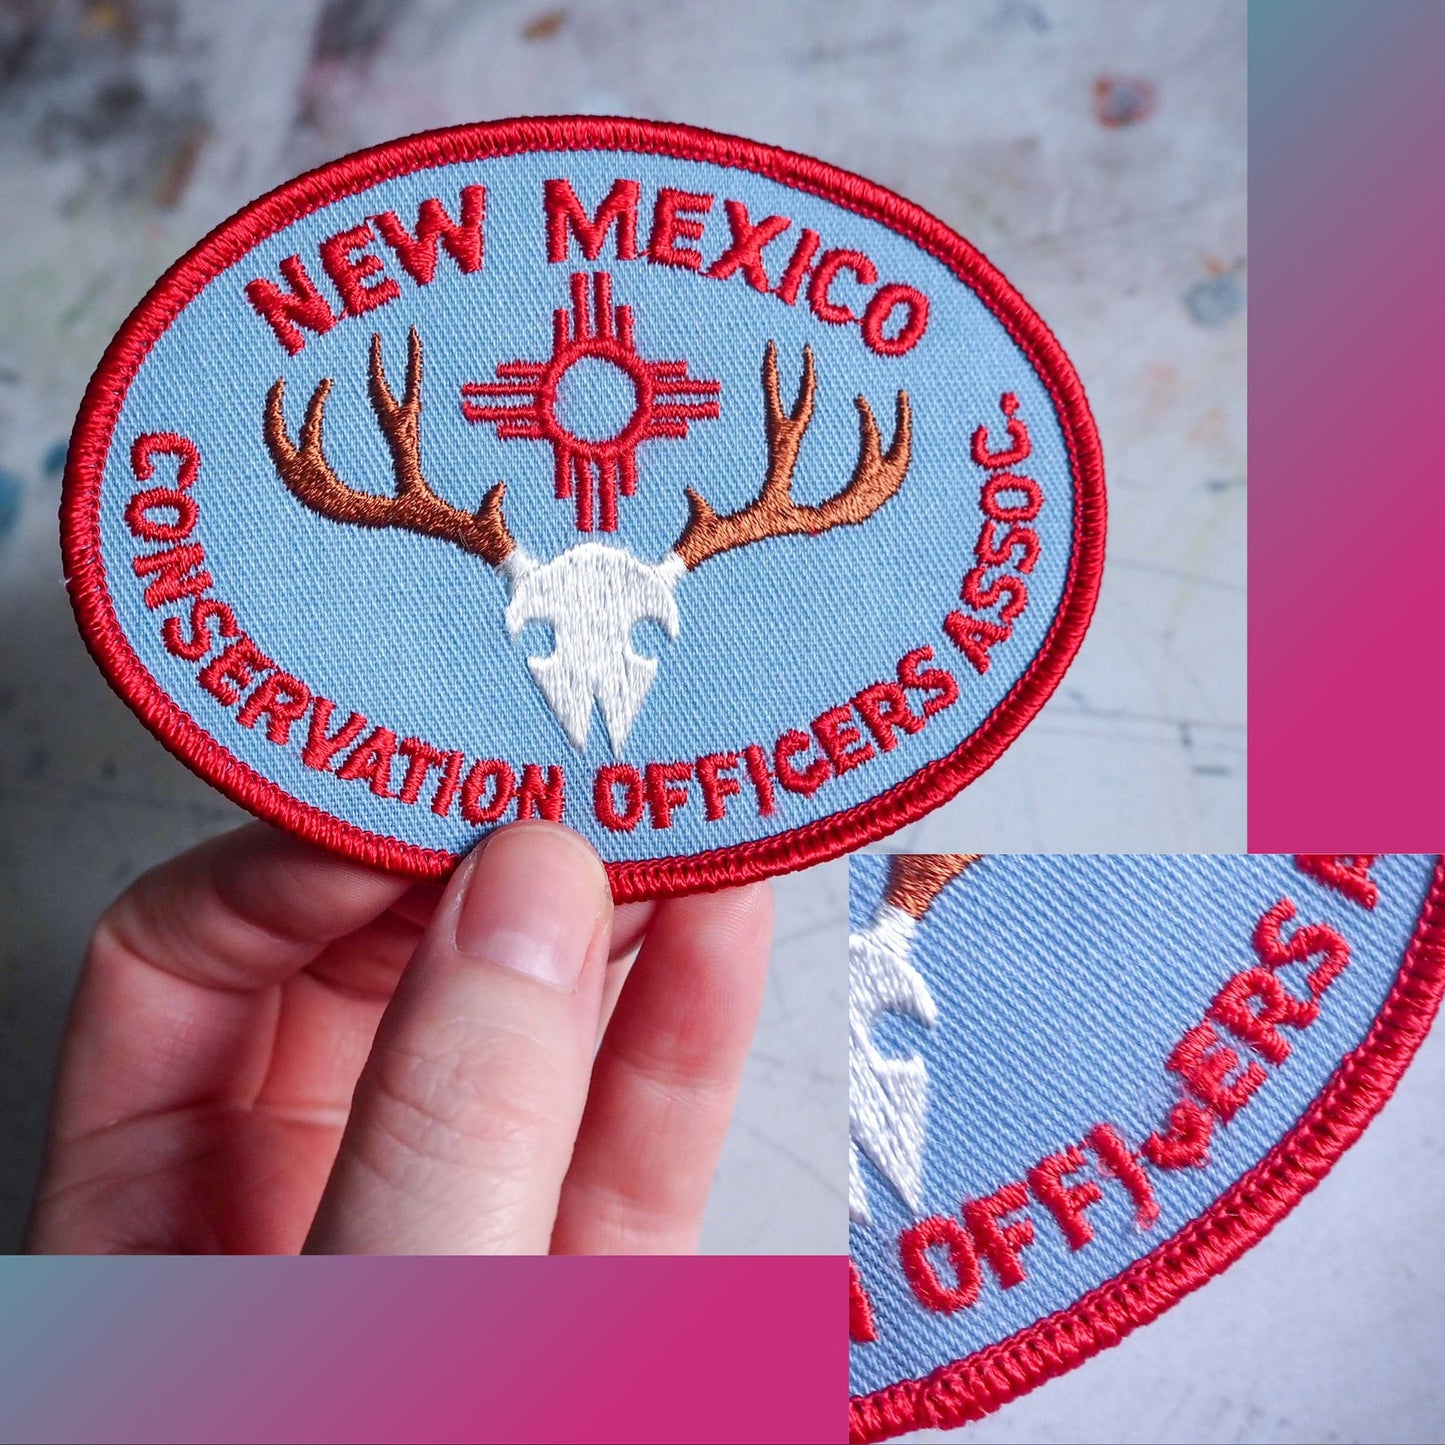 Vintage 1980s New Mexico Conservation Patch - REPAIRED